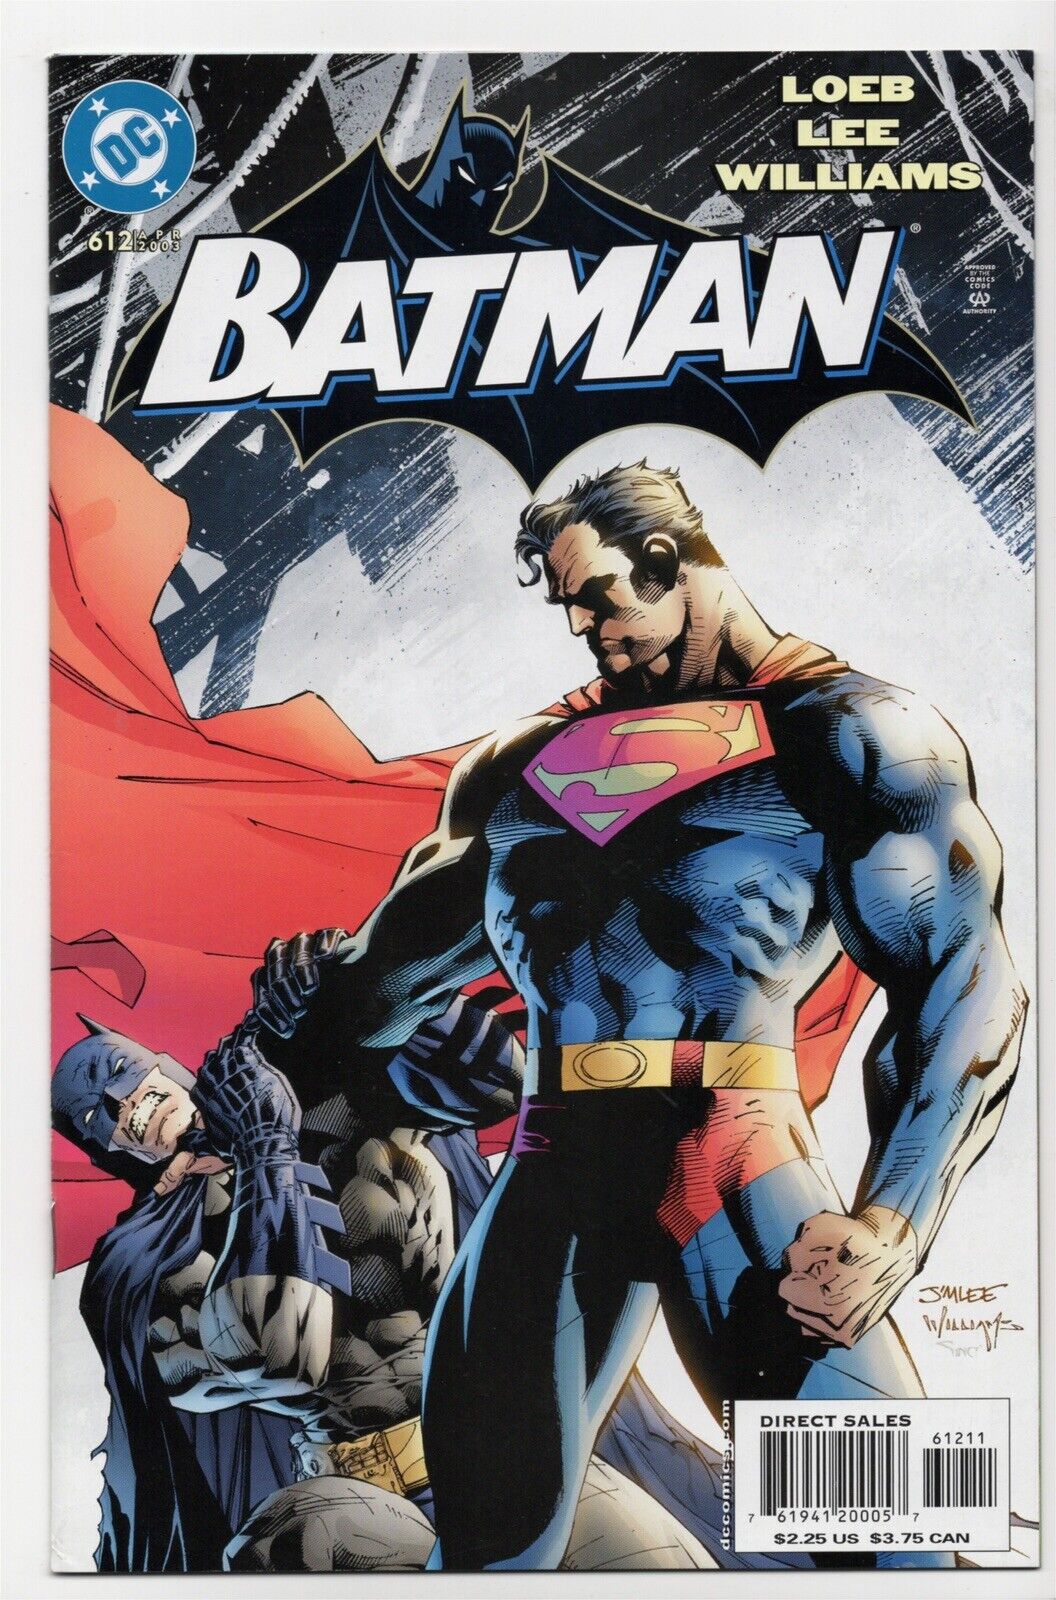 BATMAN #612 in NM- condition a 2003 DC comic with SUPERMAN 1st app of HUSH